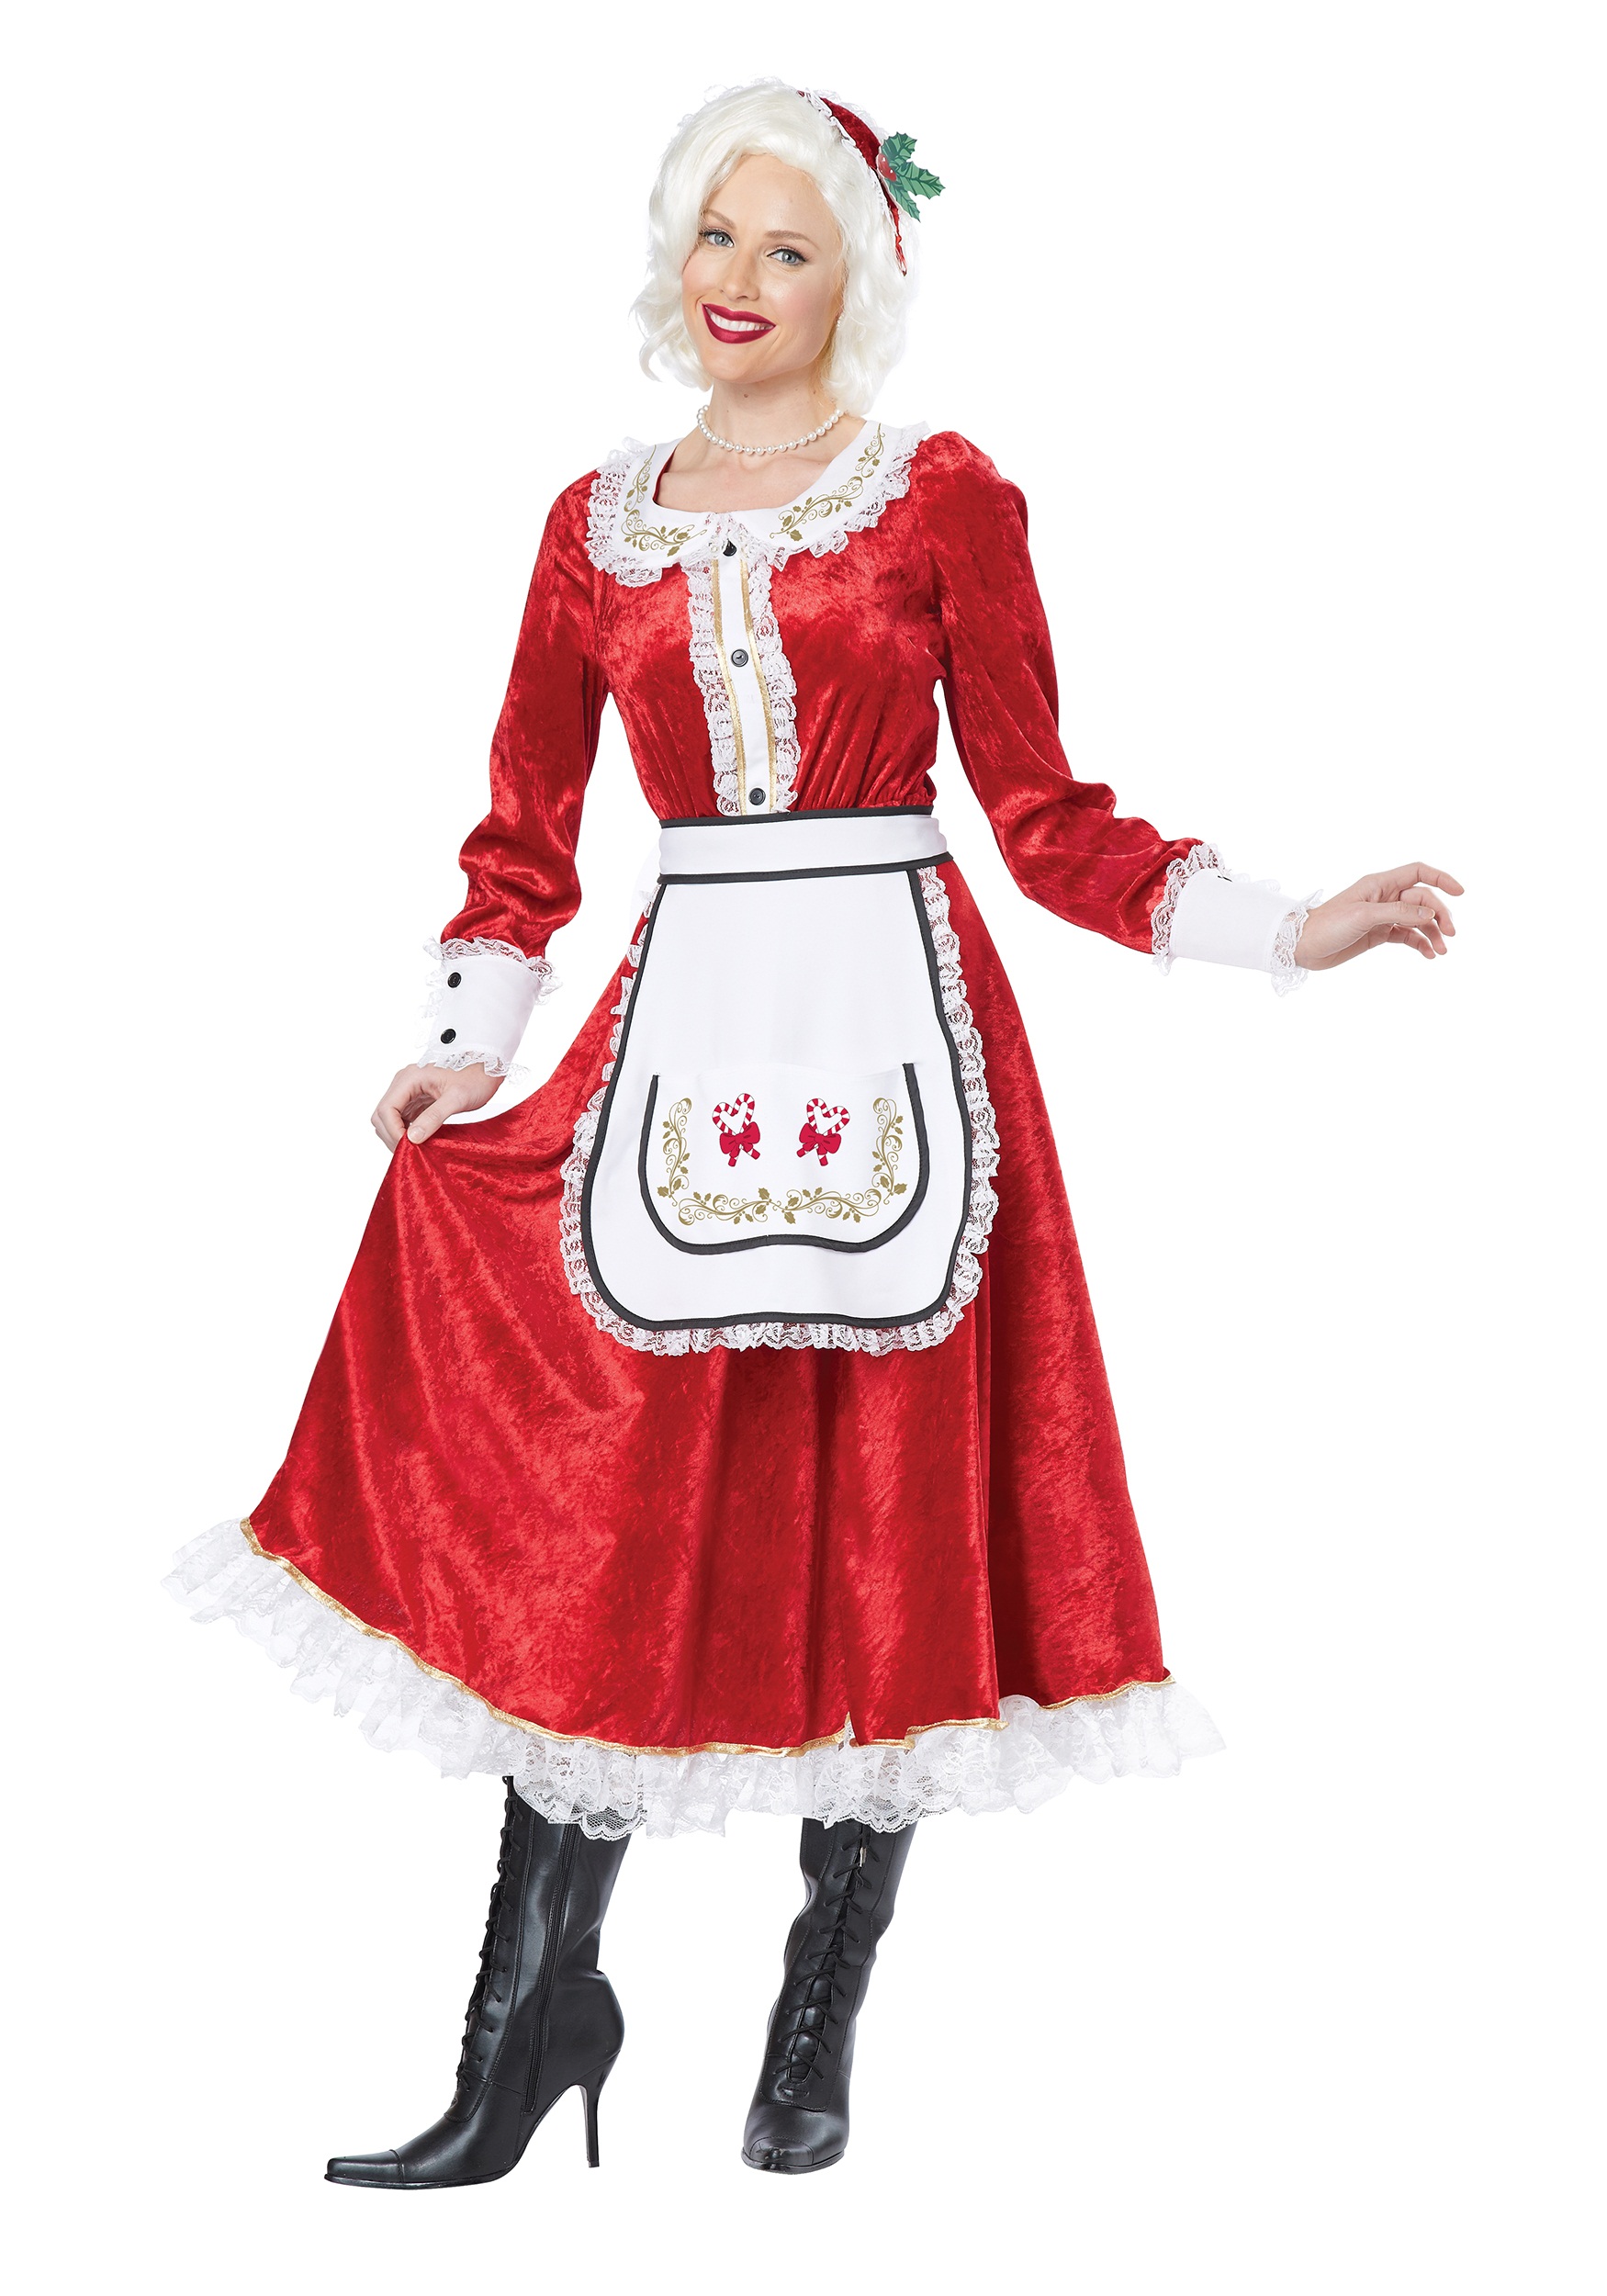 Claus Dress Traditional Costume Classic Red Gown Ladies Santa NEW Women's Mrs